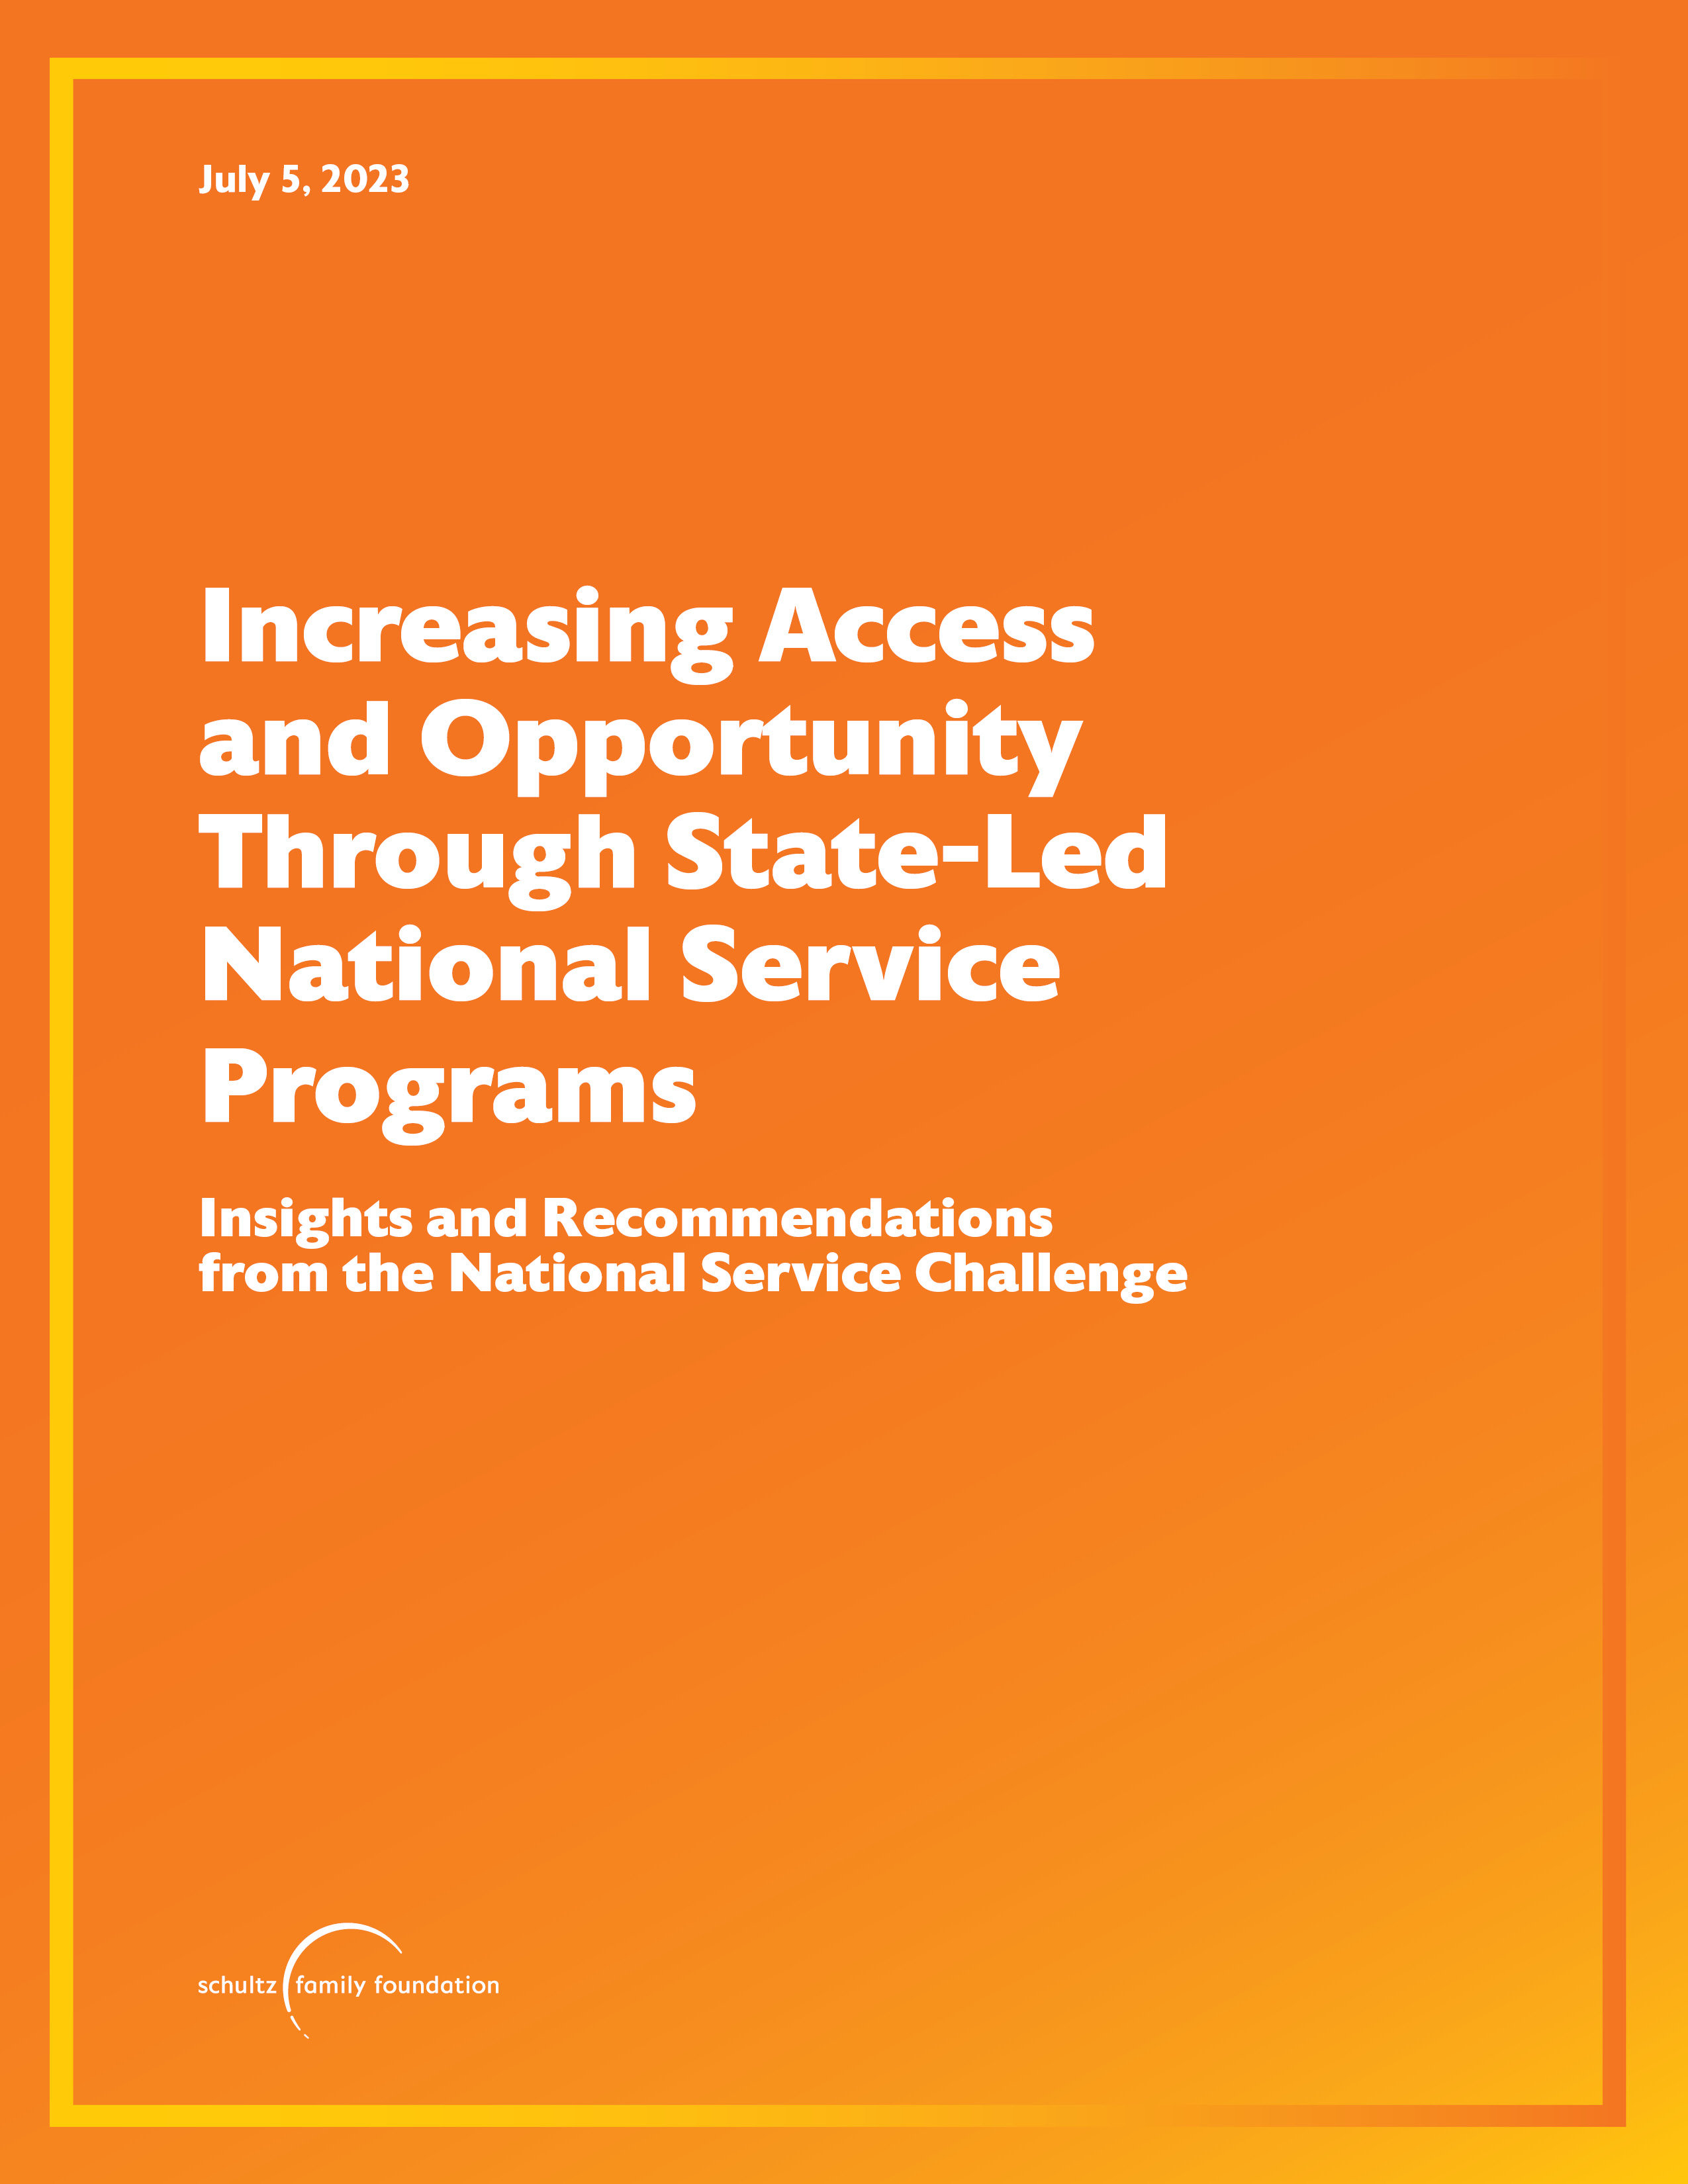 SFF paper cover image. Orange background with yellow border. Text reads July 5, 2023. Increasing Access and Opportunity Through State-Led National Service Programs: Insights and Recommendations from the National Service Challenge. Includes Schultz Family Foundation logo.